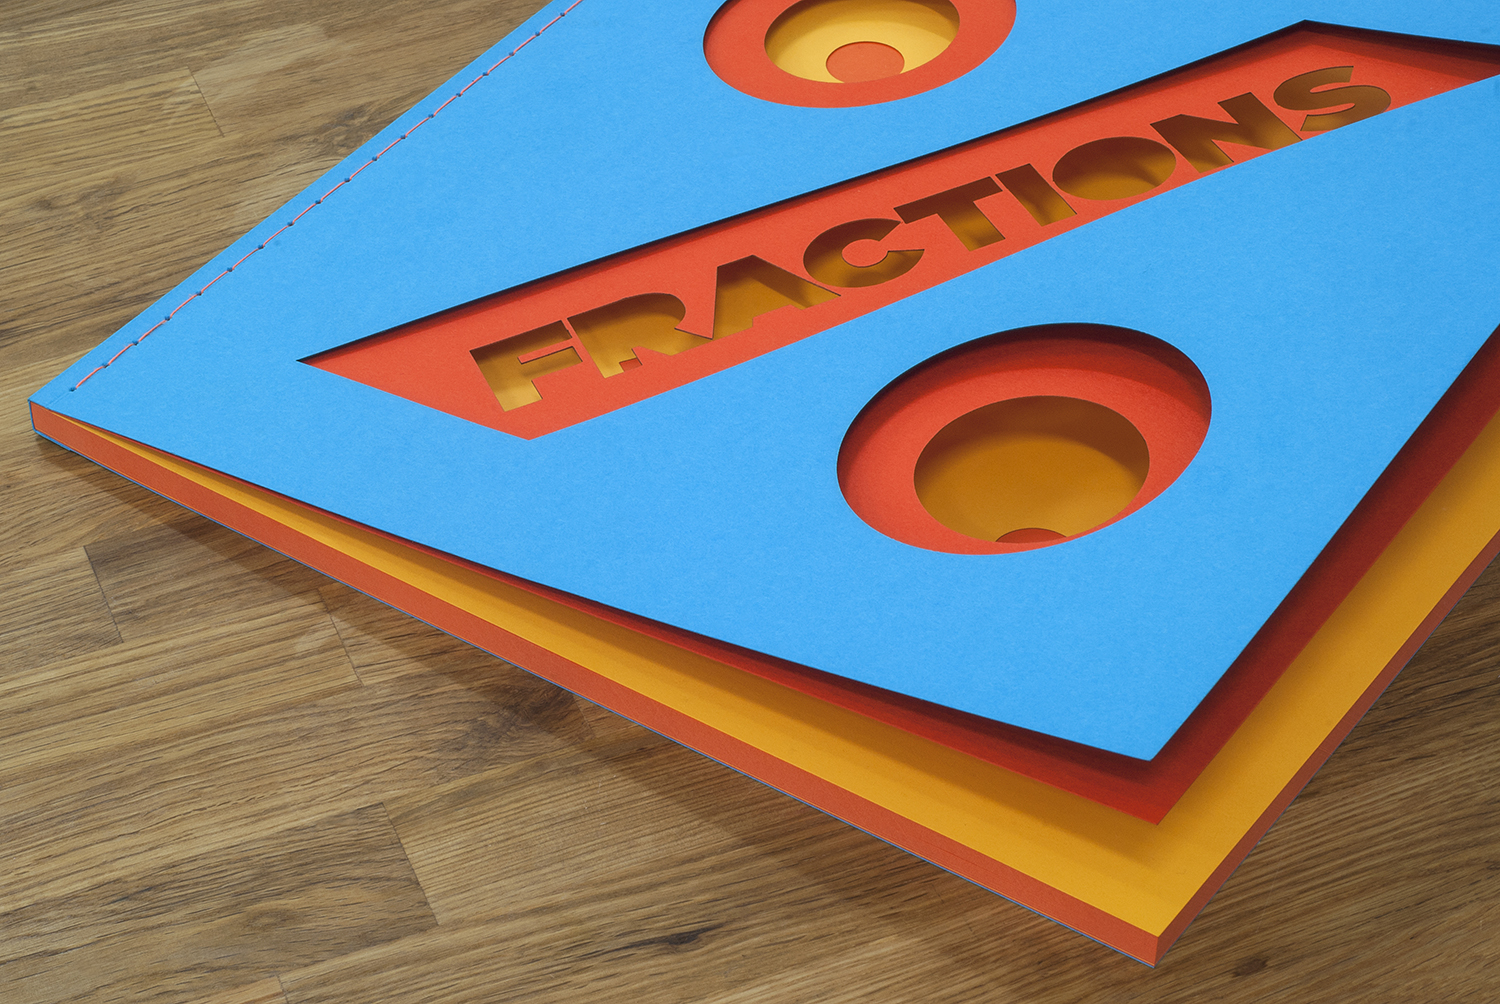 ‘FRACTIONS’ BOOK